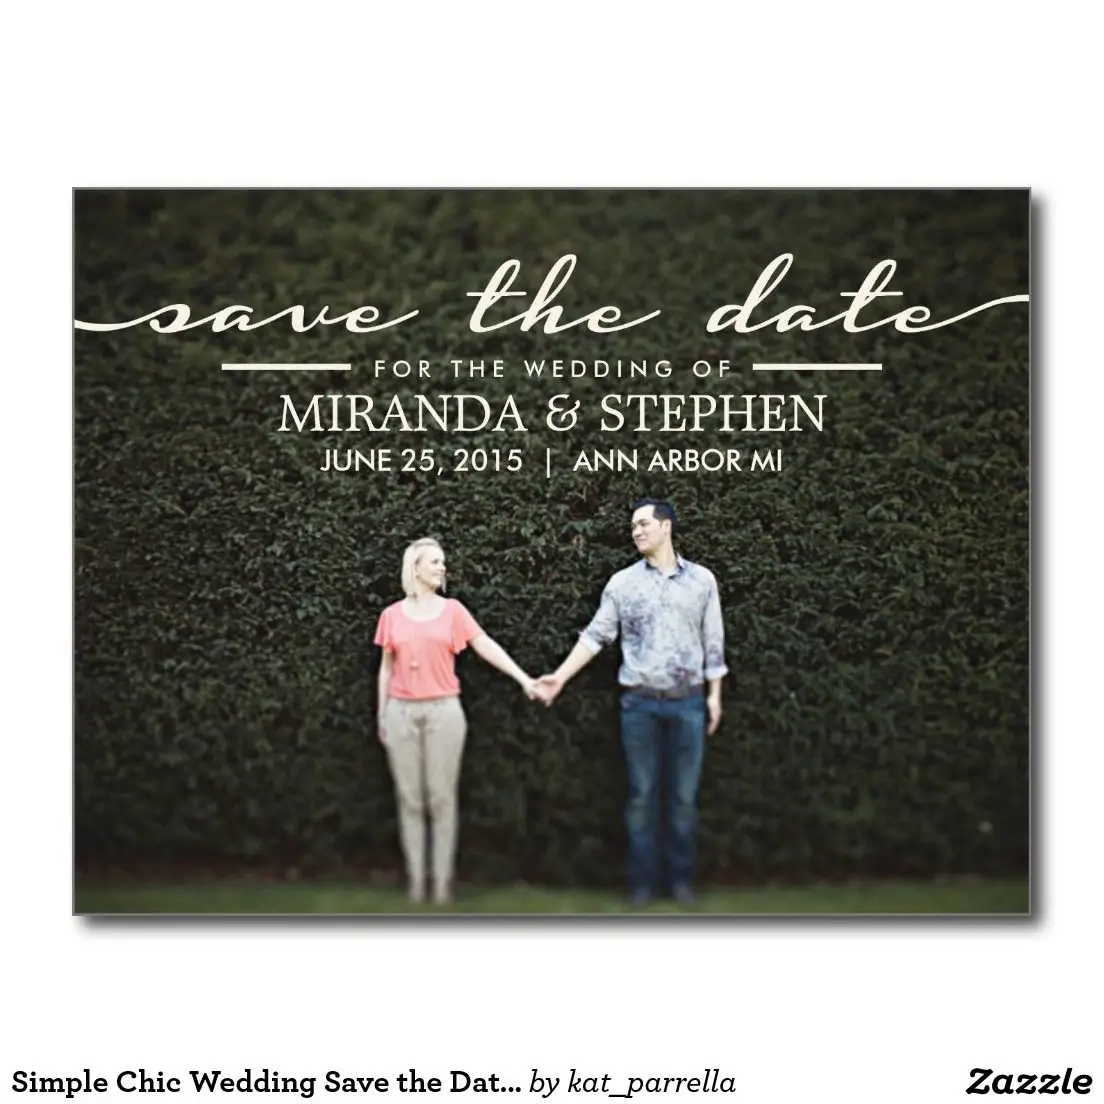 Simple Chic Wedding Save the Date Photo Postcard